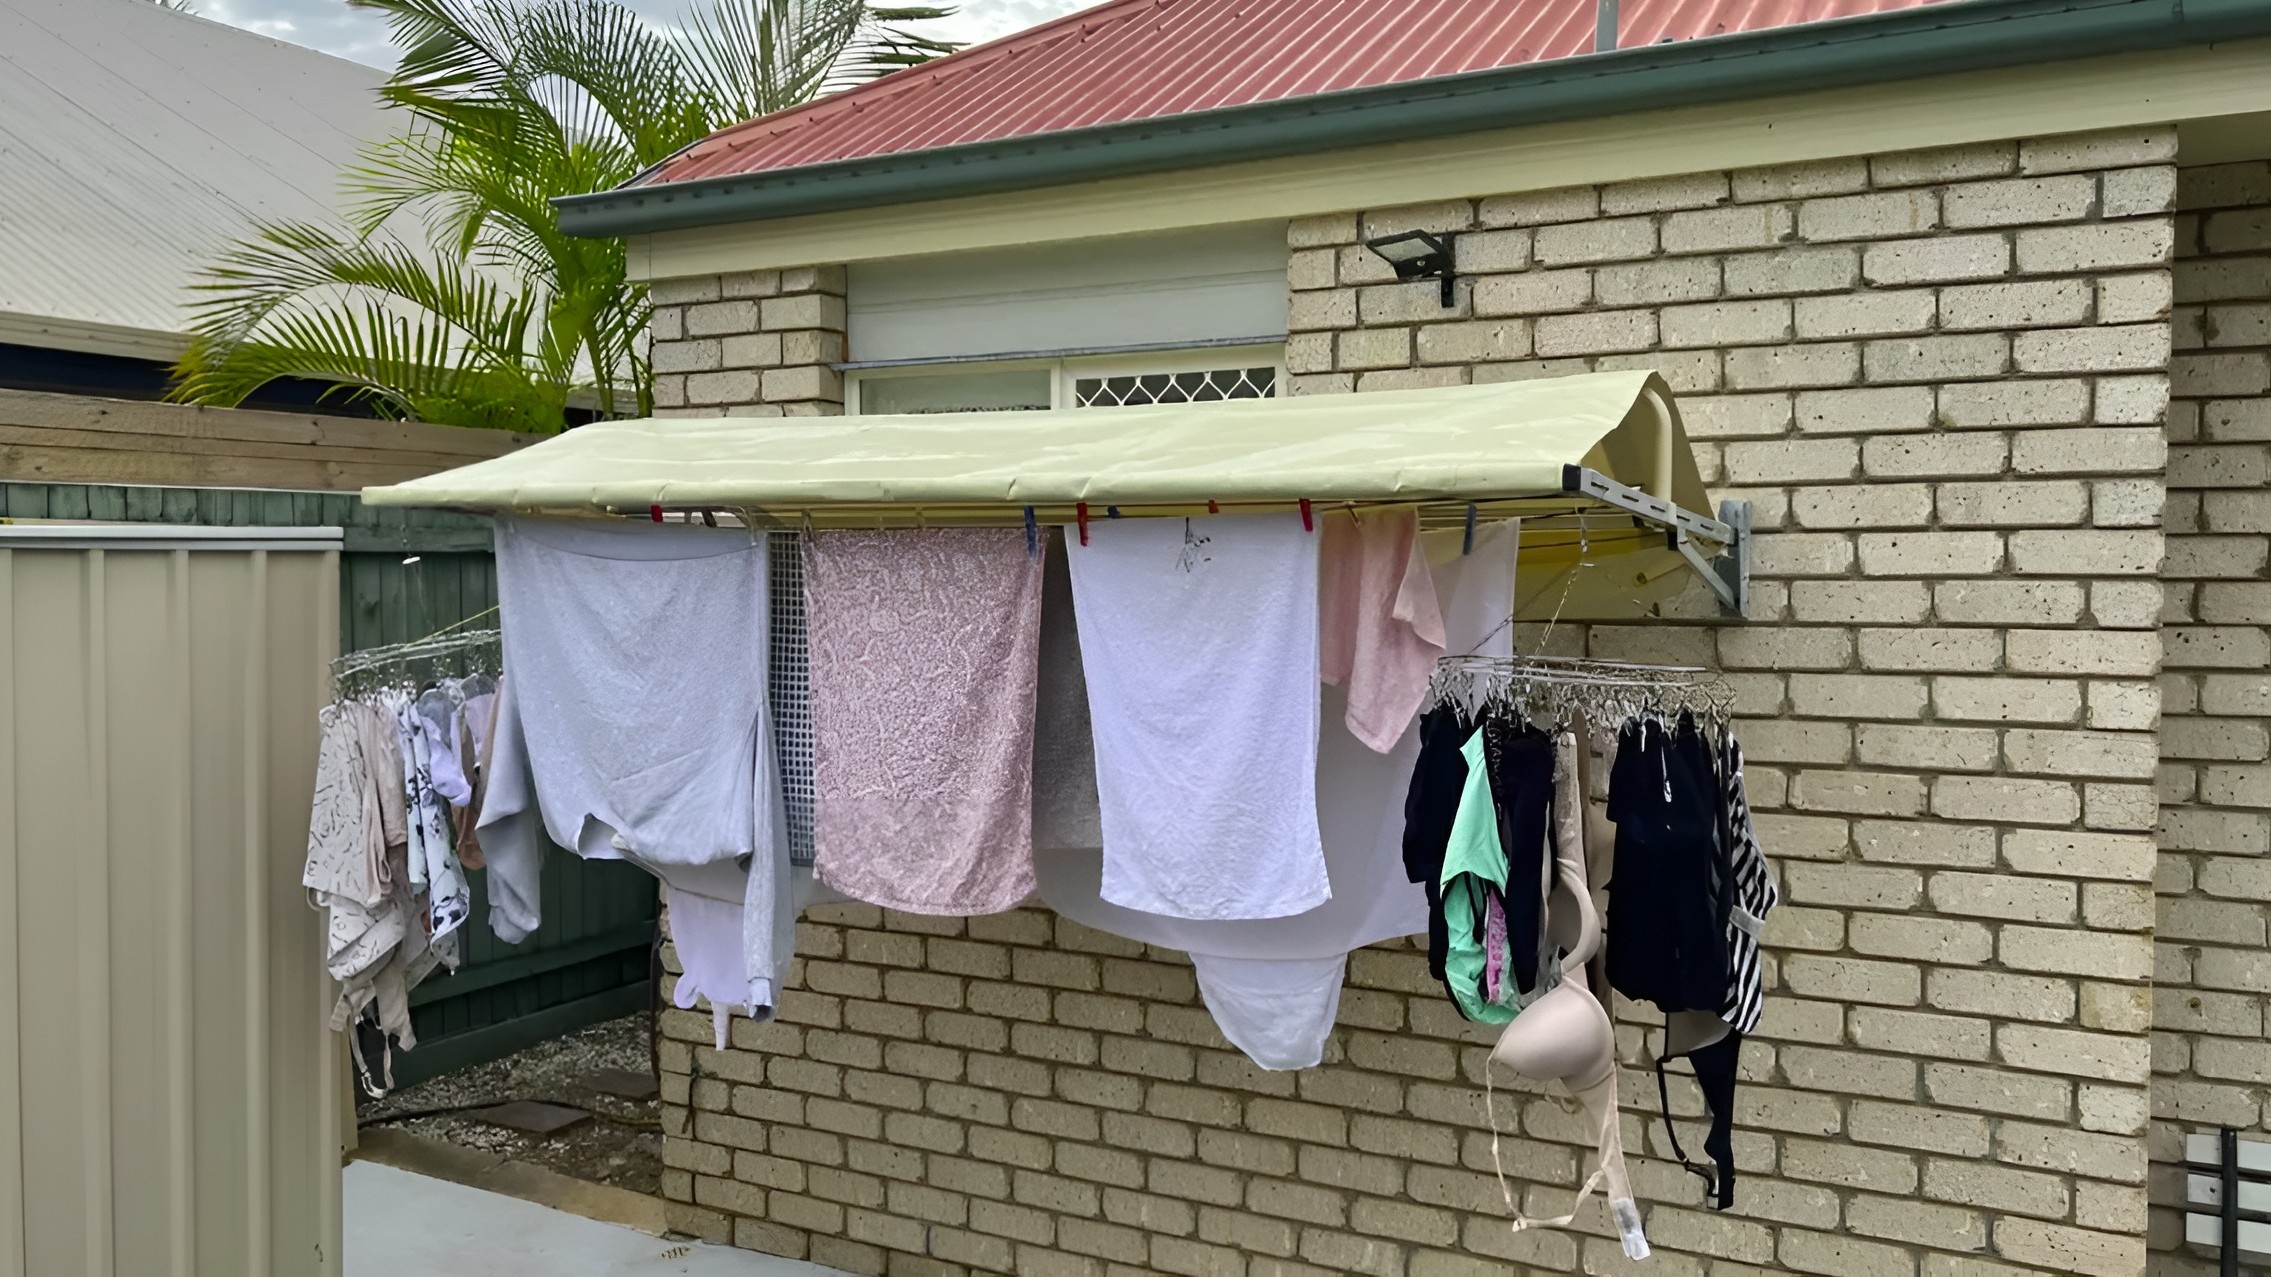 Heavy Duty Wall Mounted Washing Line Protective Measures: Fold Down Covers and More